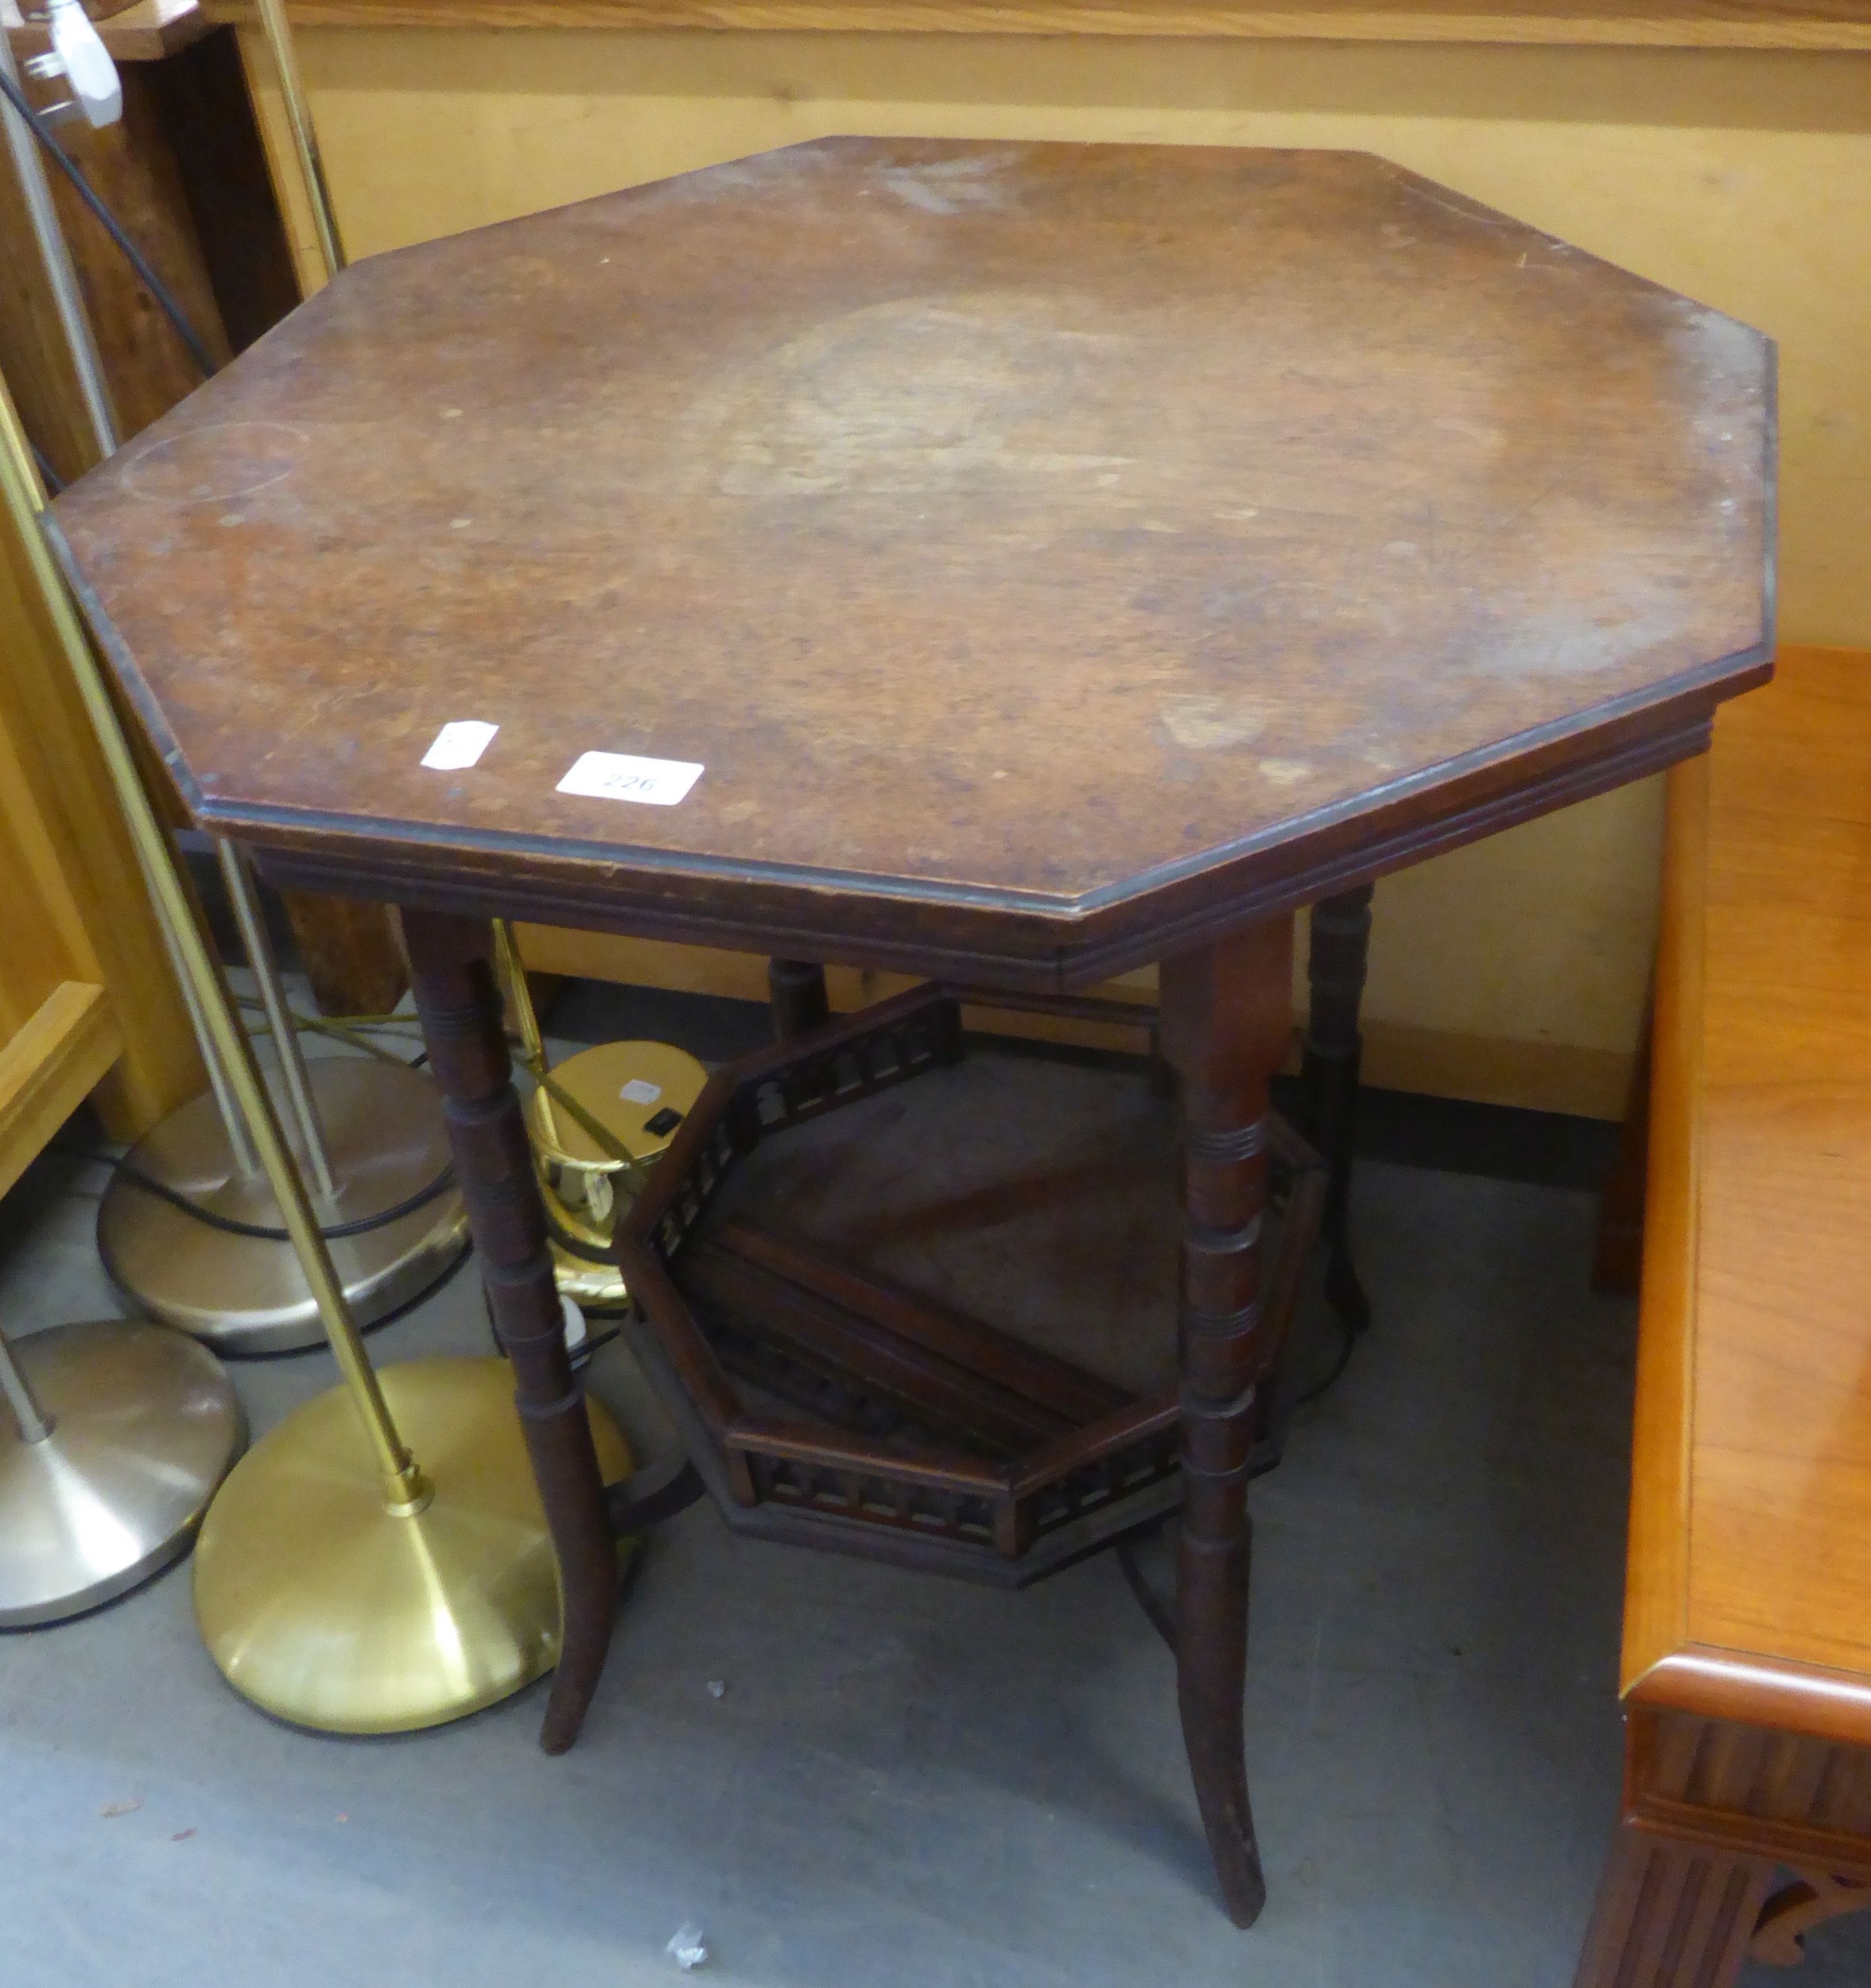 NINETEENTH CENTURY AESTHETICS RED WALNUT OCTAGONAL OCCASIONAL TABLE, WITH GALLERIED SHELF STRETCHER